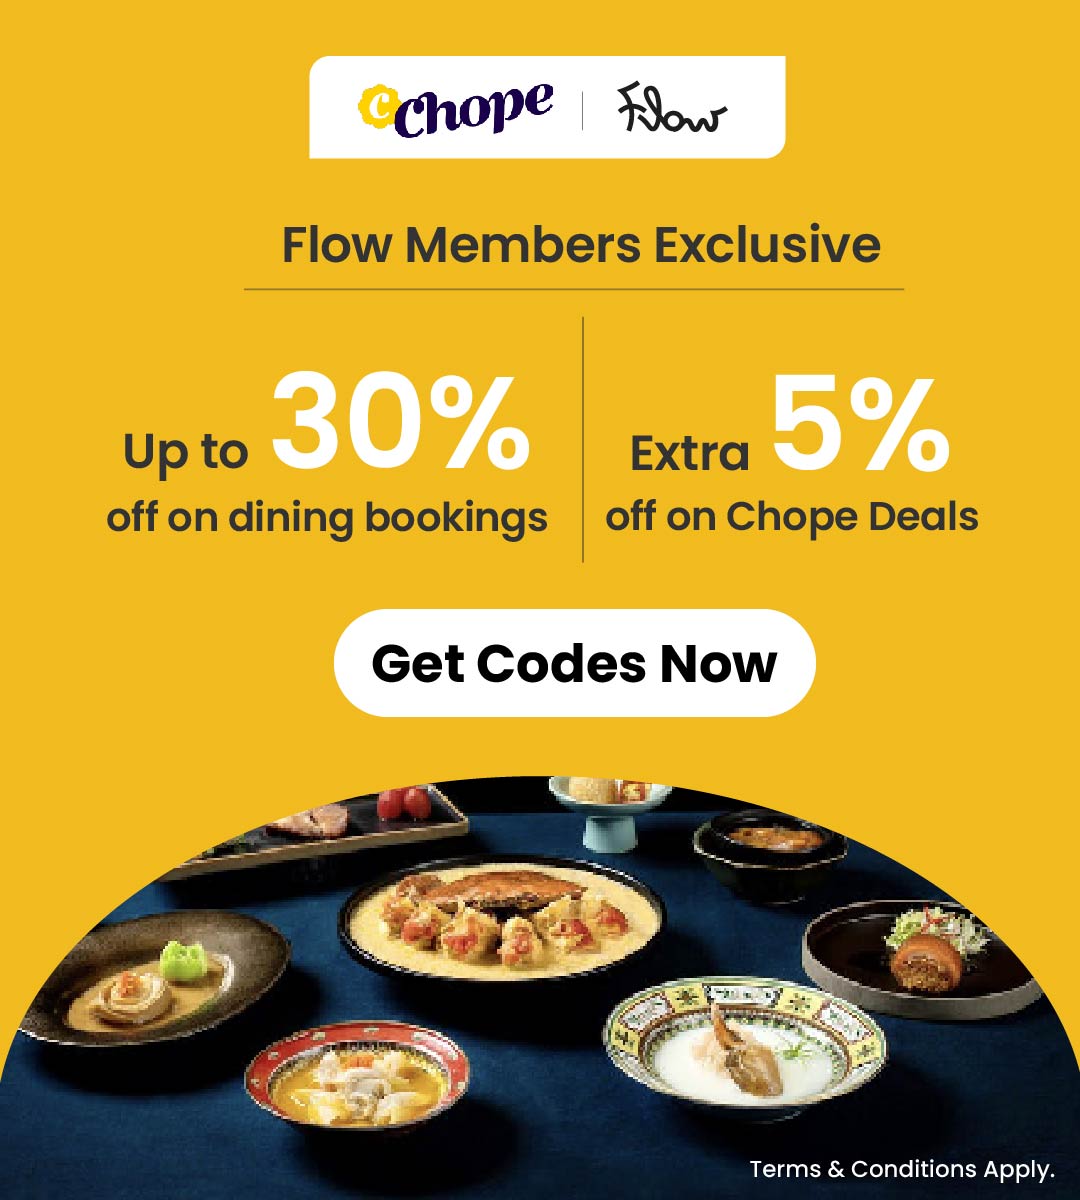 Flow x Chope: Enjoy up to 30% off on dining bookings. Don't miss out extra 5% off on Chope Deals.